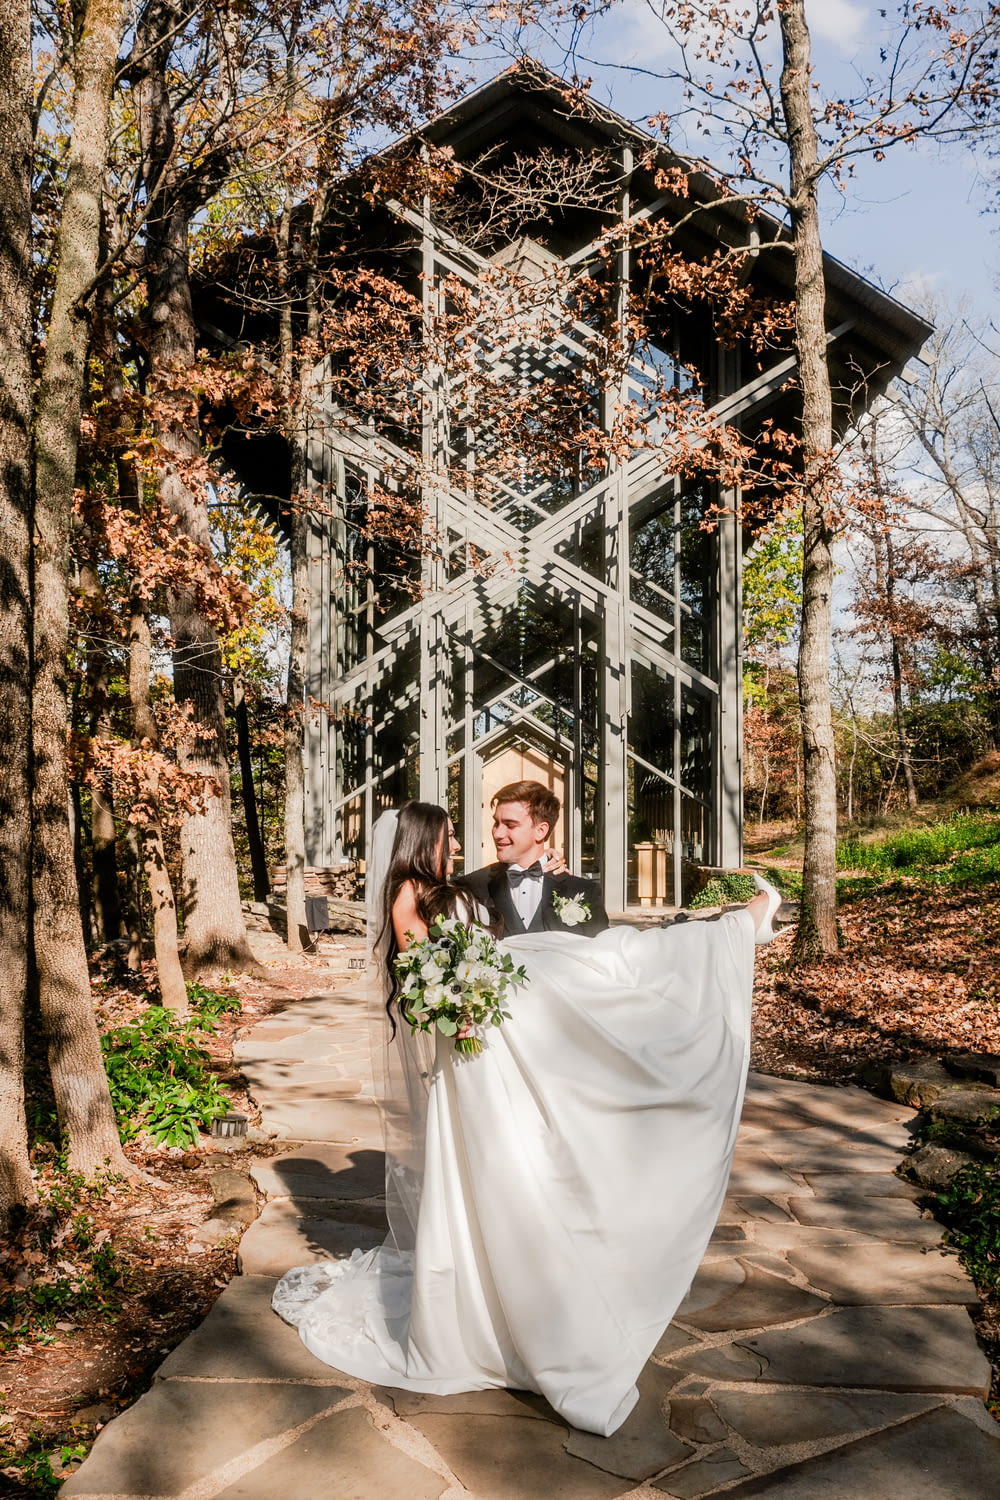 a bride and groom pose for a photo in front of a gazebo